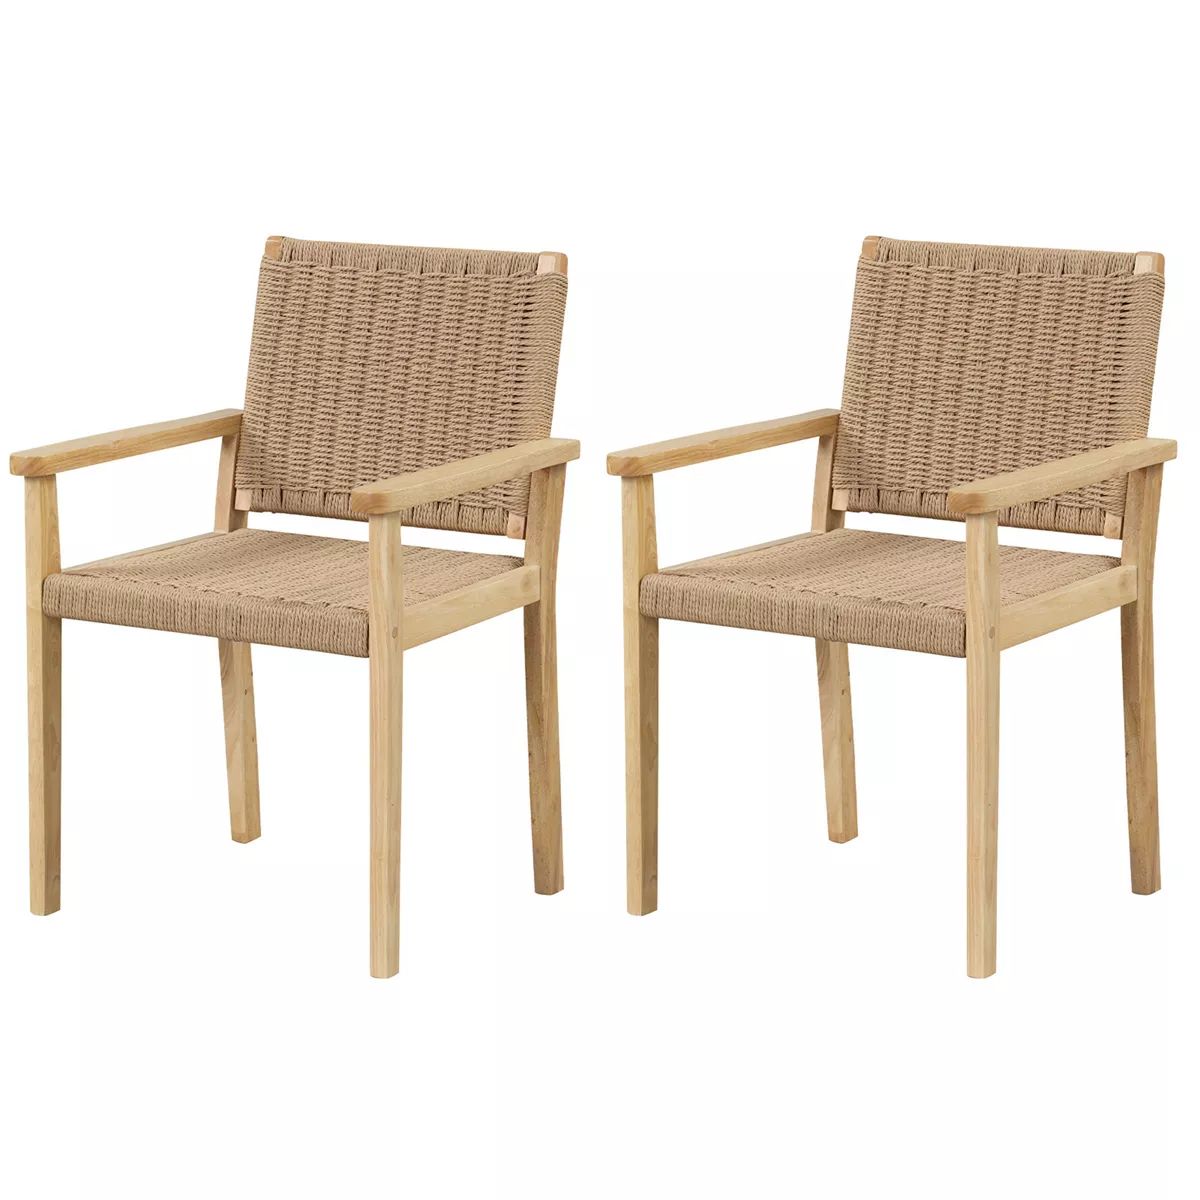 Costway Patio Chair Set of 2/4 Rubber Wood Dining Armchairs Paper Rope Woven Seat Balcony | Target